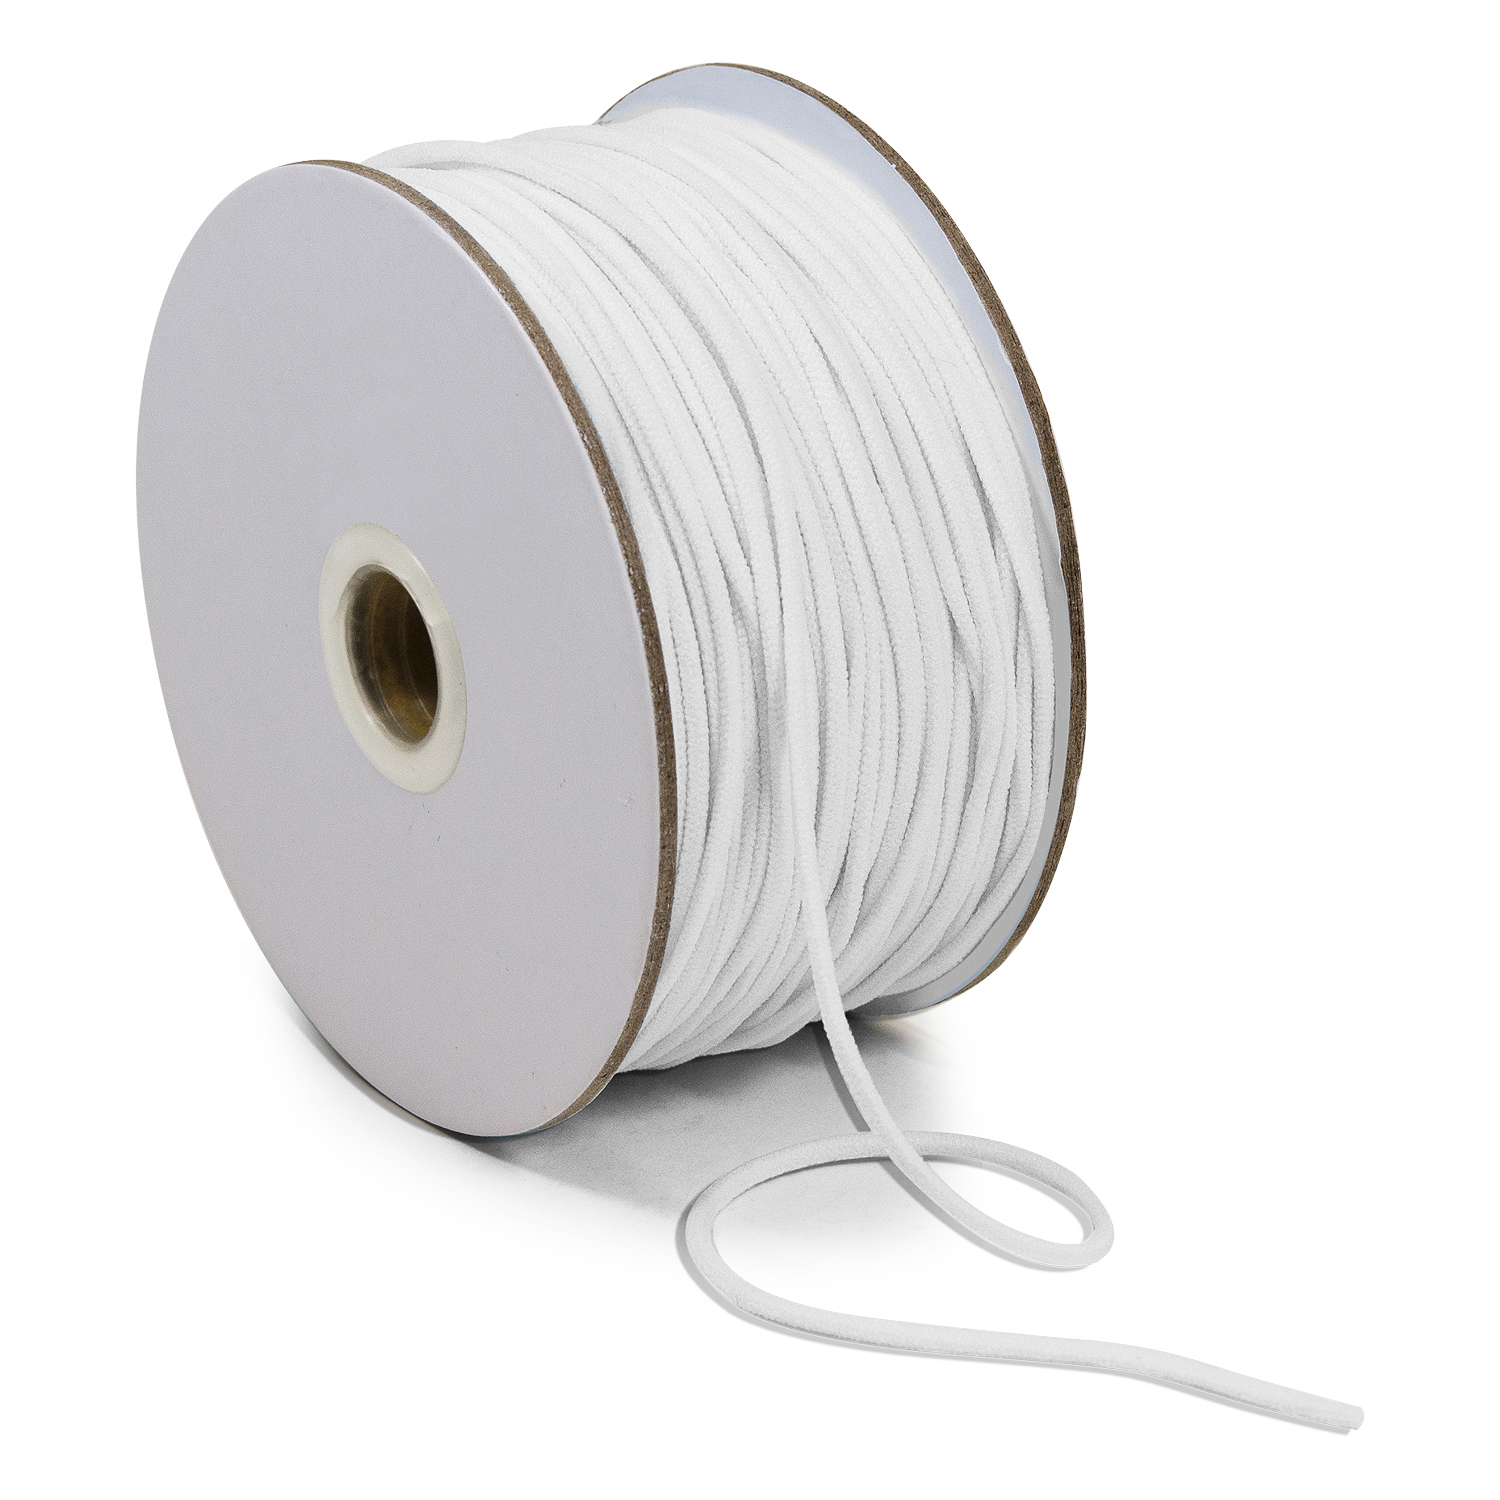 Elastic Bands for Sewing 1 Inch 12 Yard High Elasticity Knit Spool